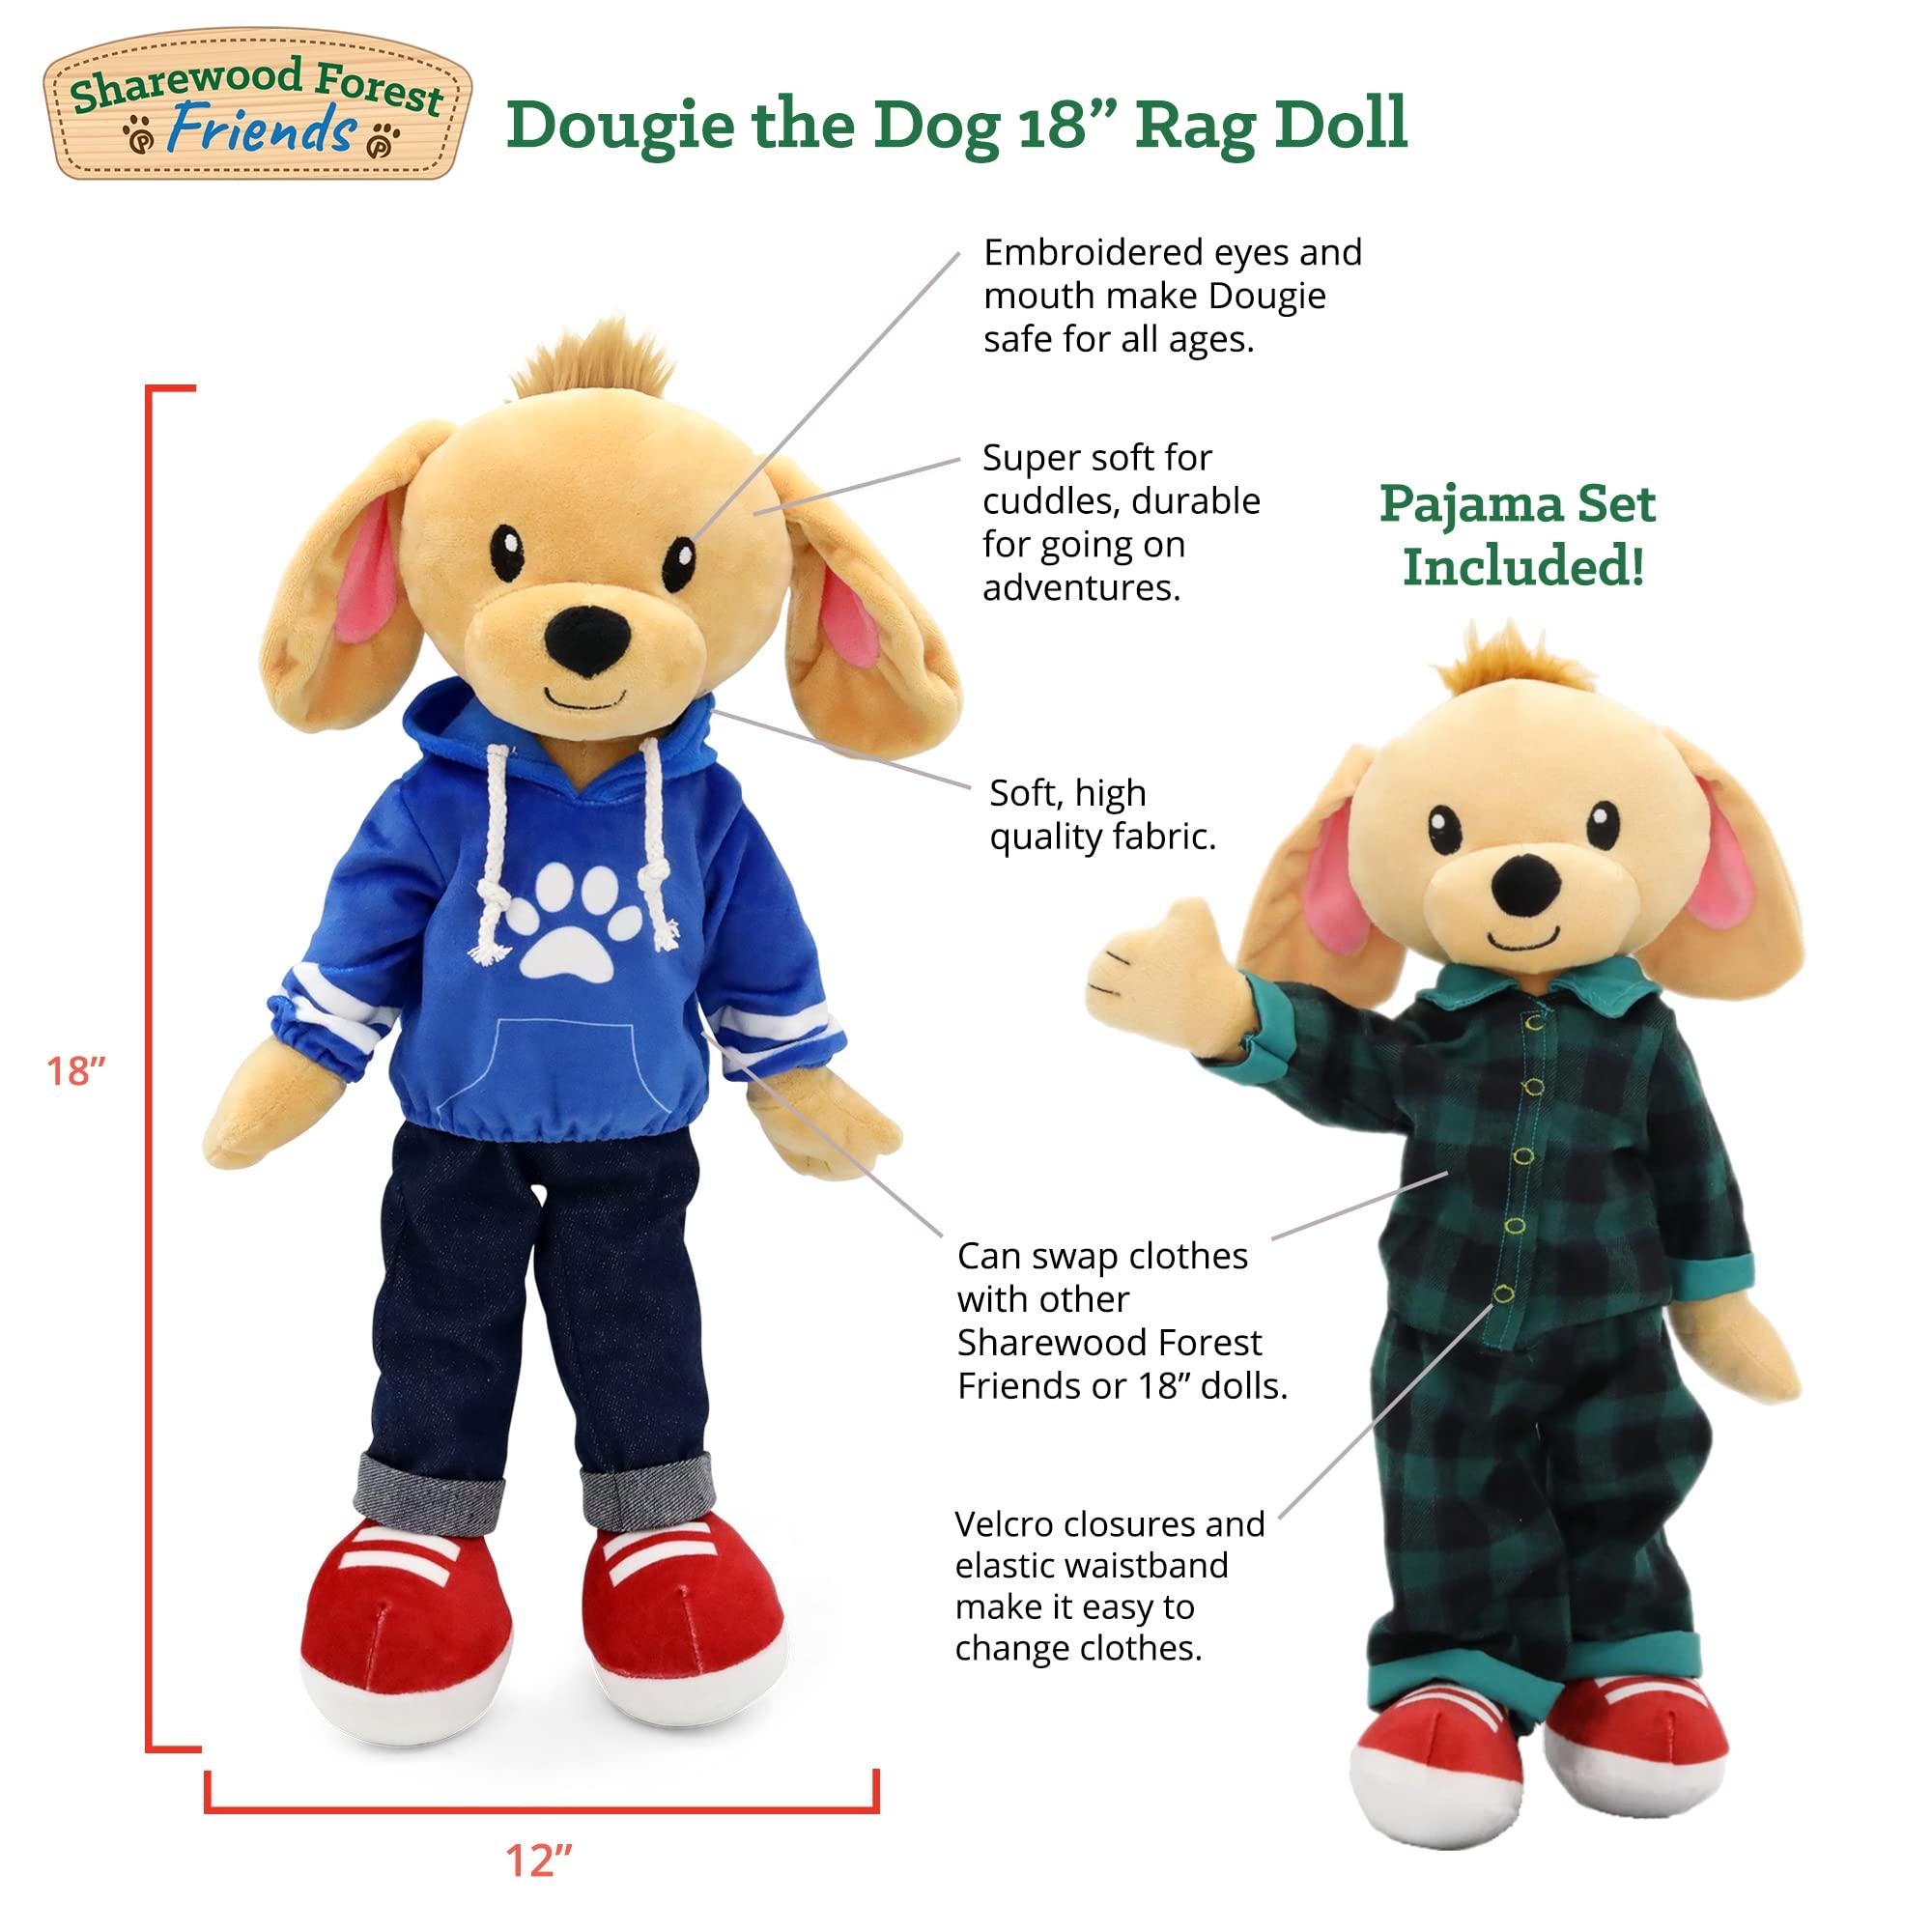 Sharewood Forest Friends 18 Inch Rag Doll Dougie the Dog - OrangeOnions Wholesale